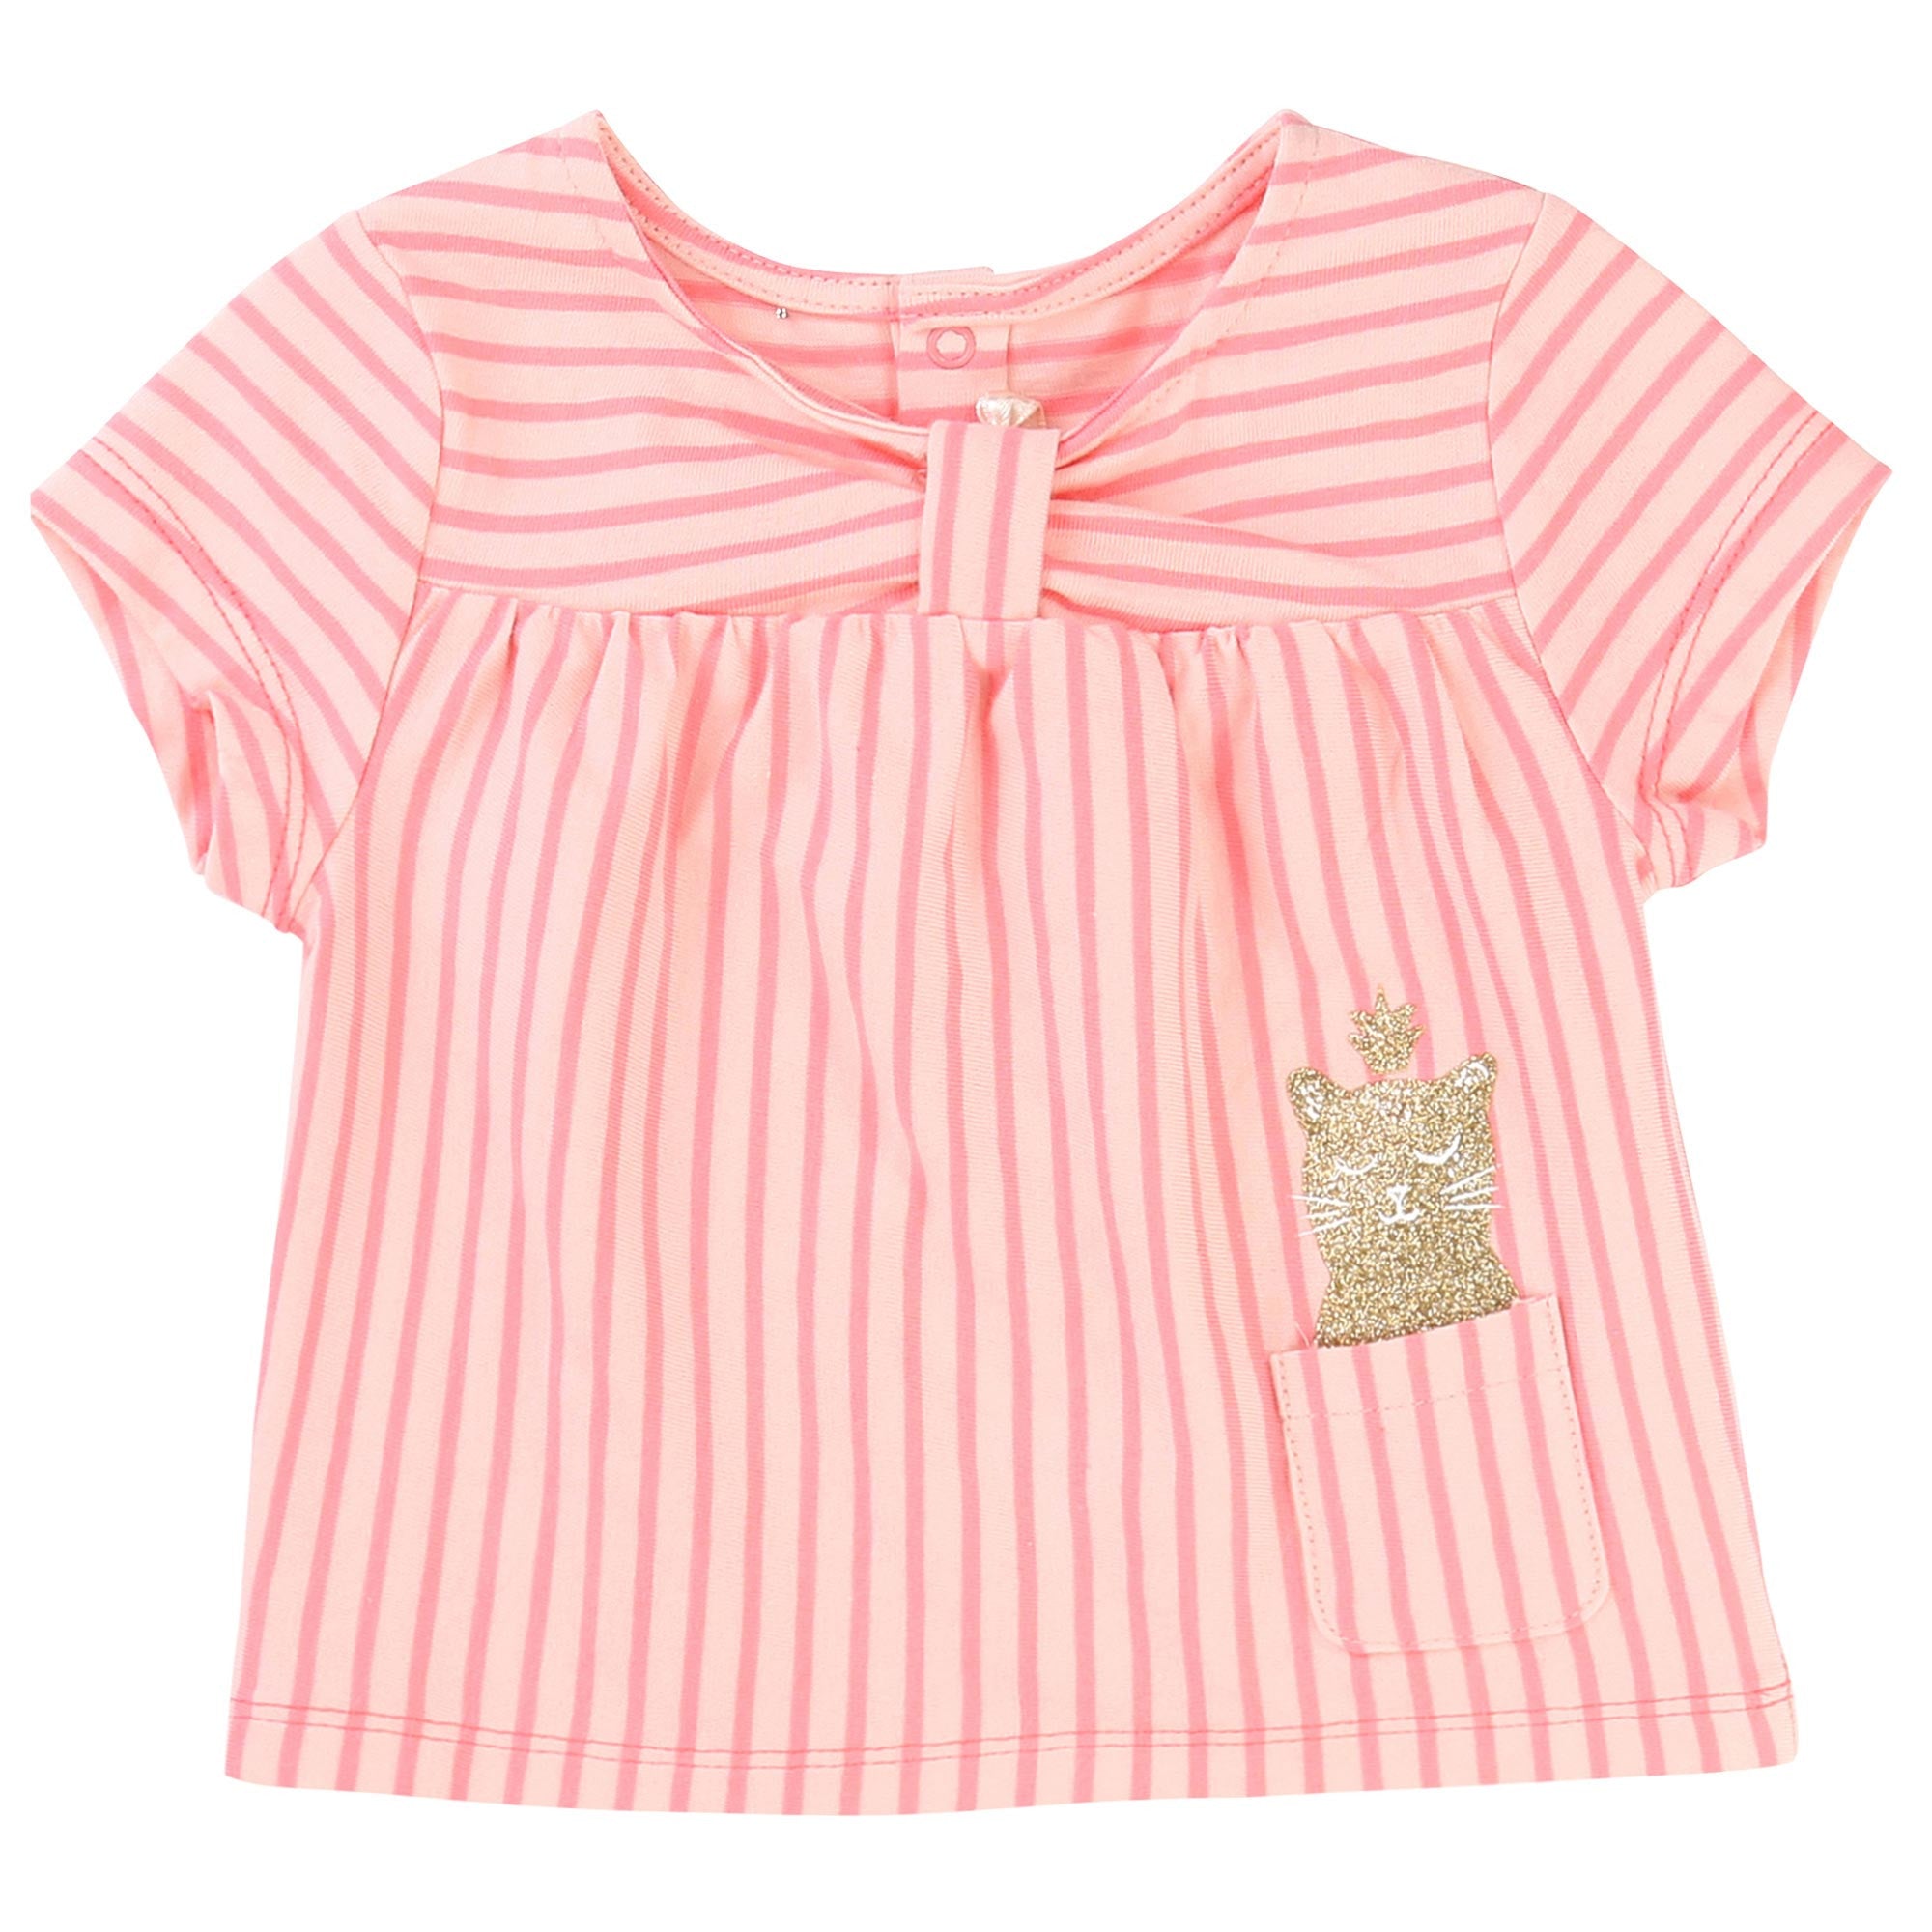 Baby Girls Pink Striped Cotton Blouse